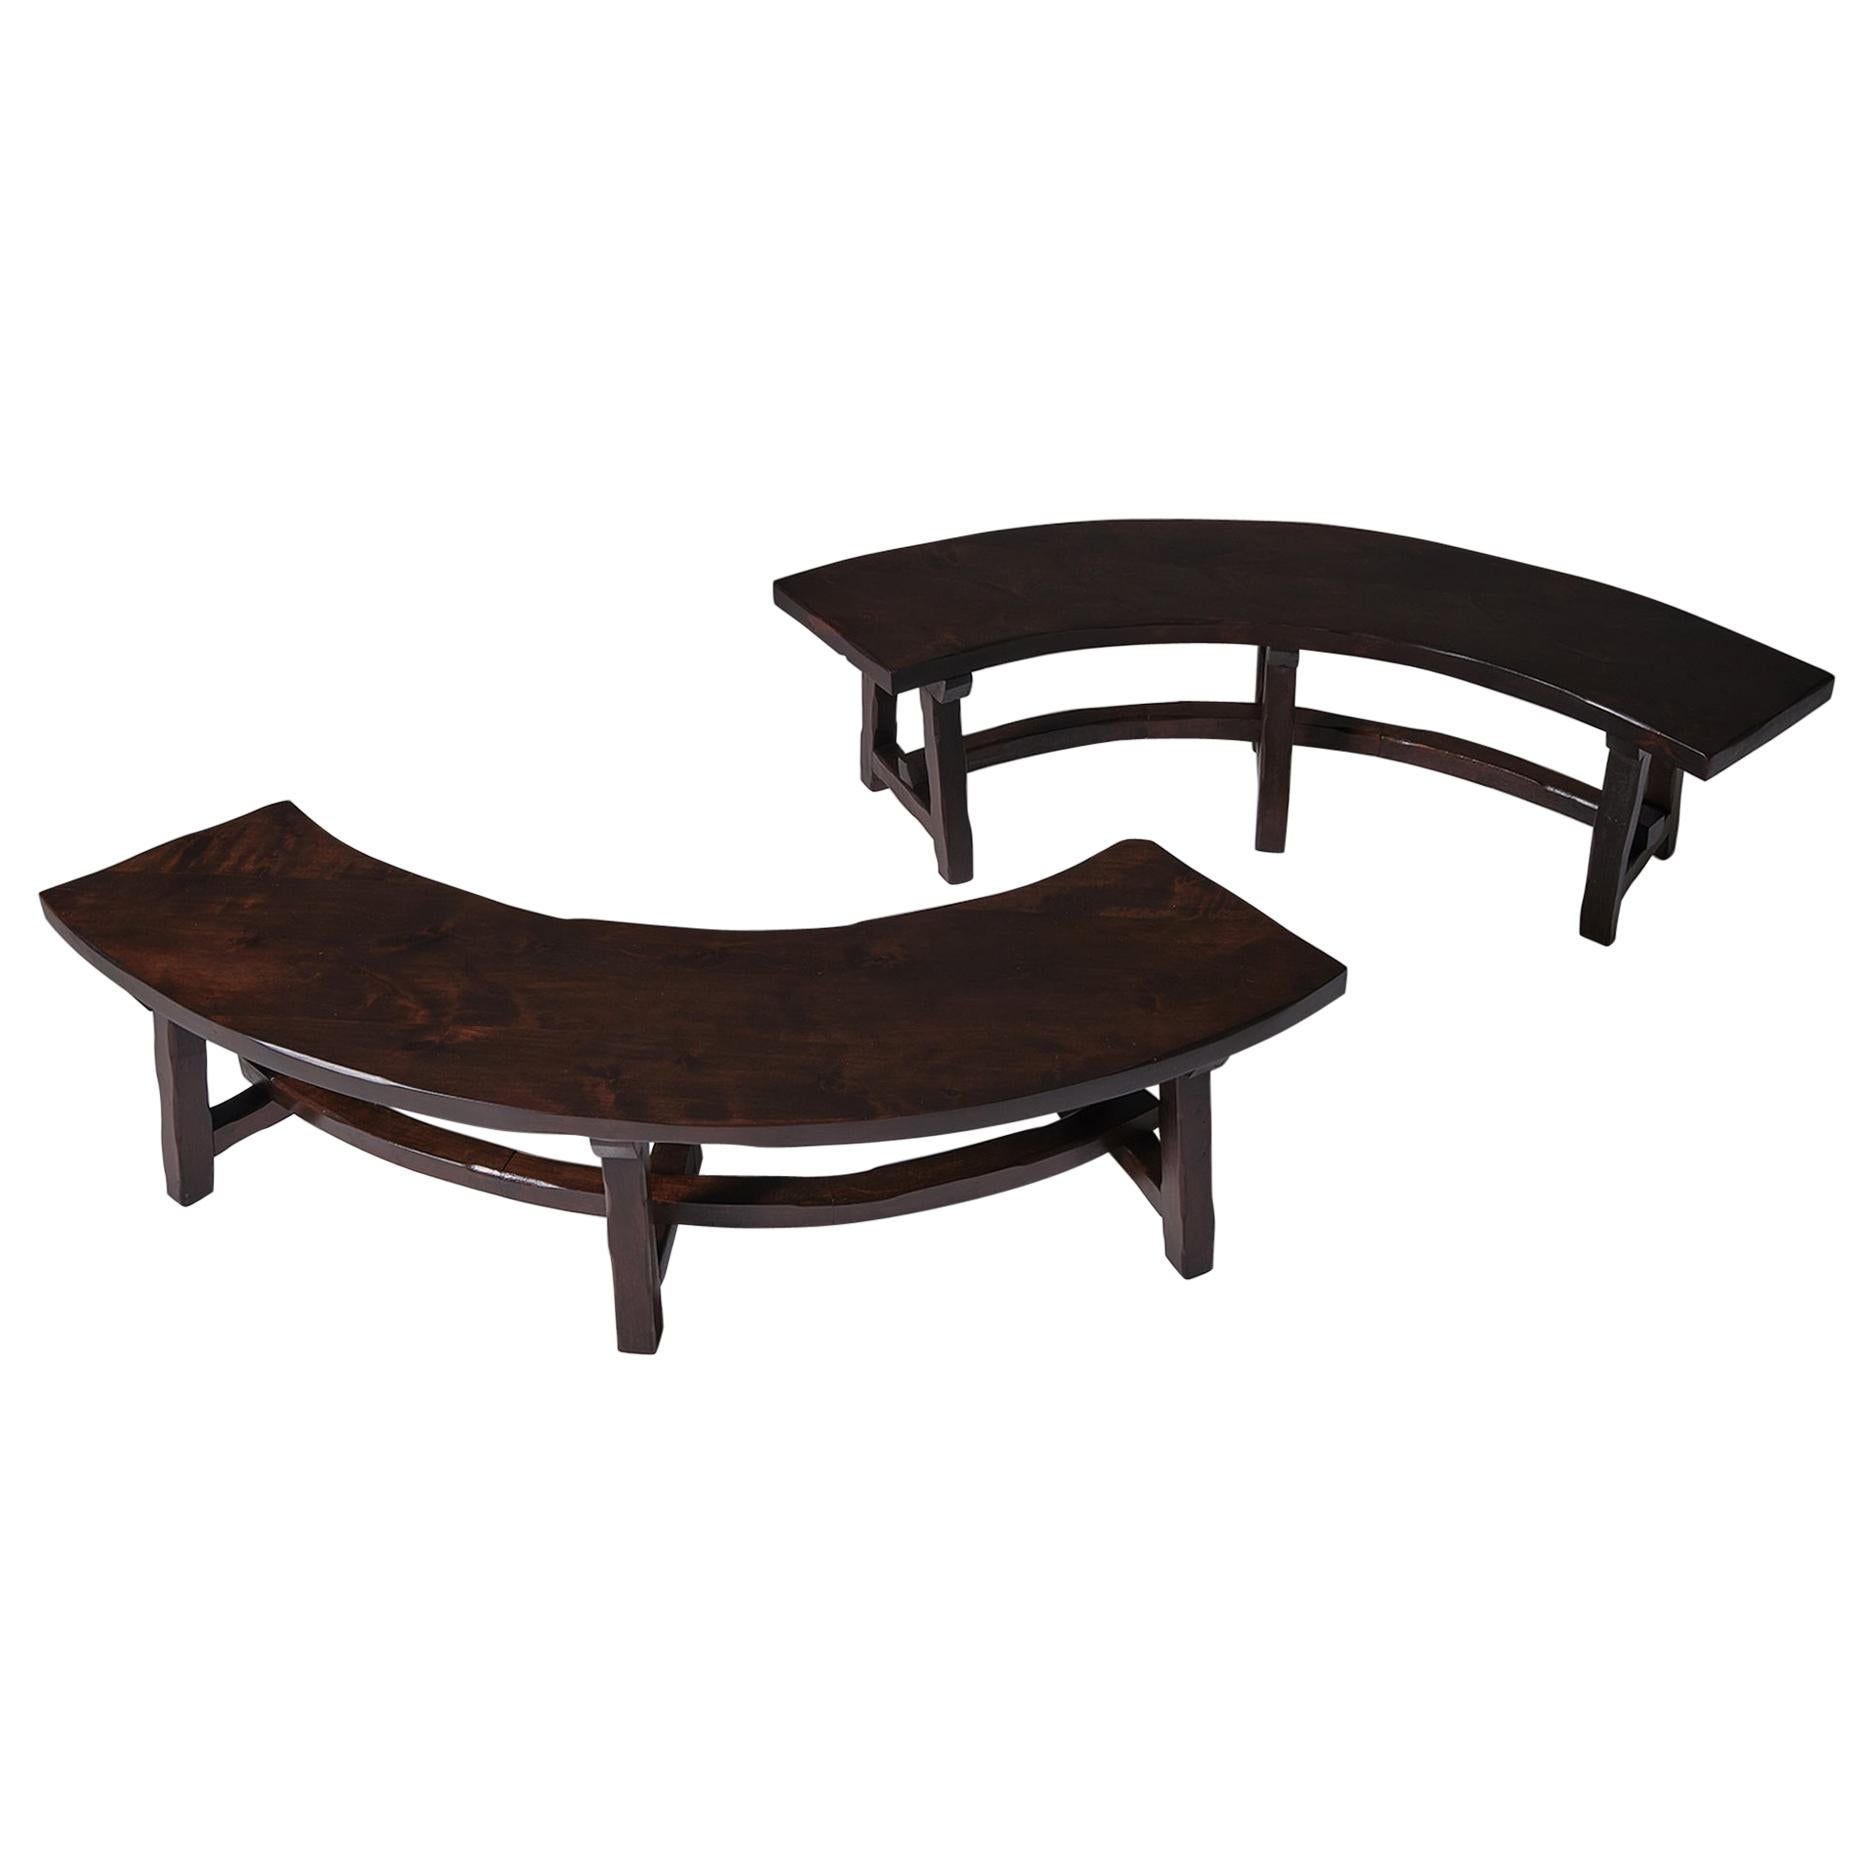 French Stained Ash Curved Wooden Benches, Set of Two For Sale